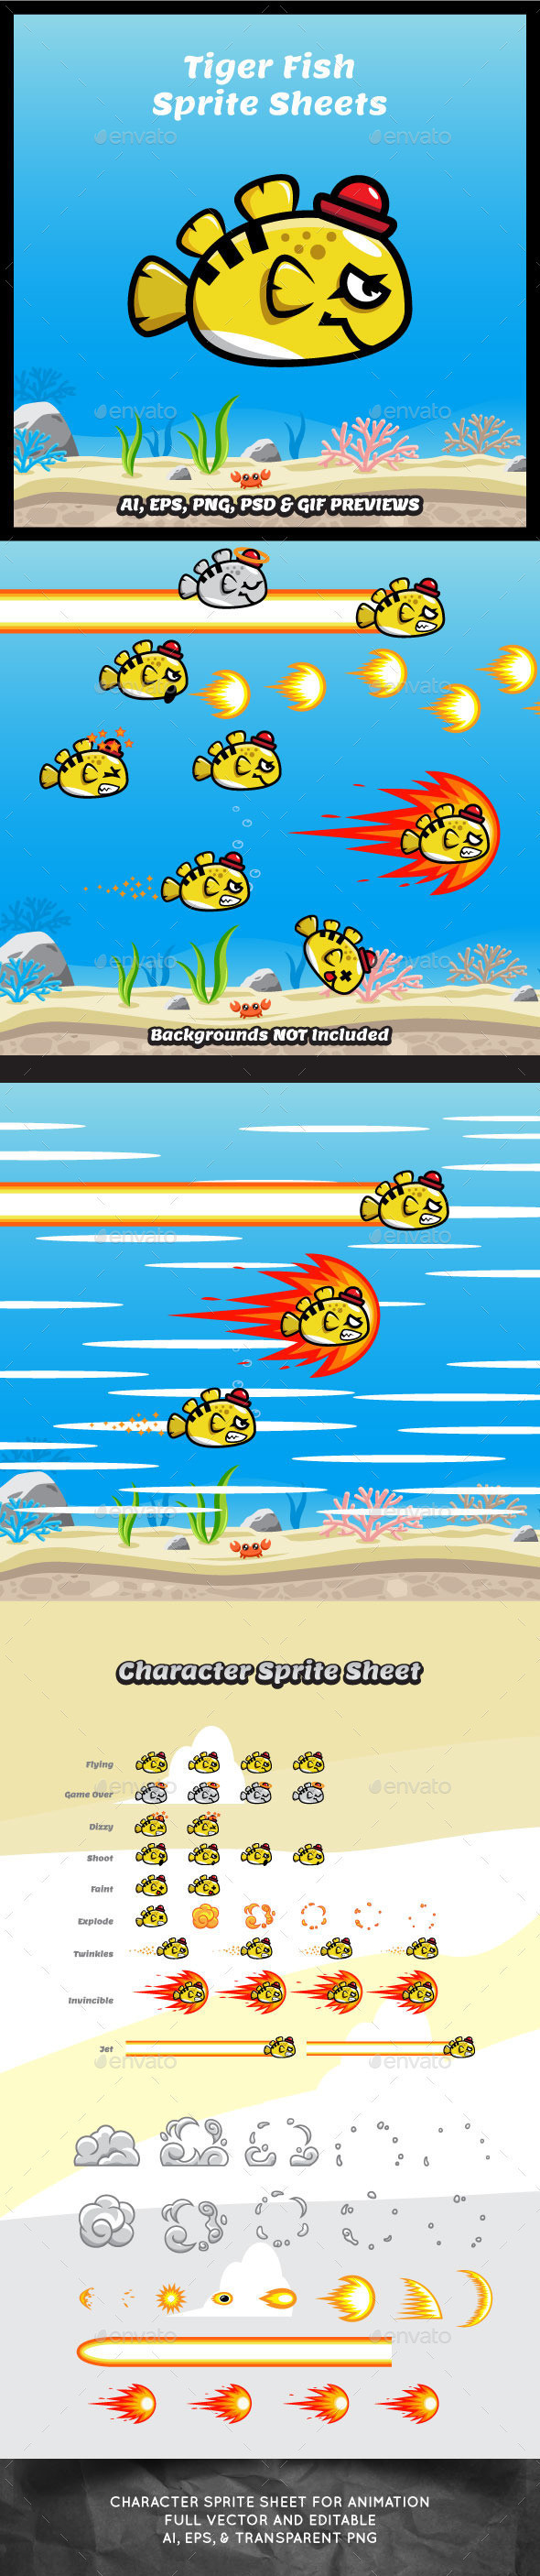 Tiger fish game character sprite sheet sidescroller game asset flying flappy animation gui mobile games gameart game art 590